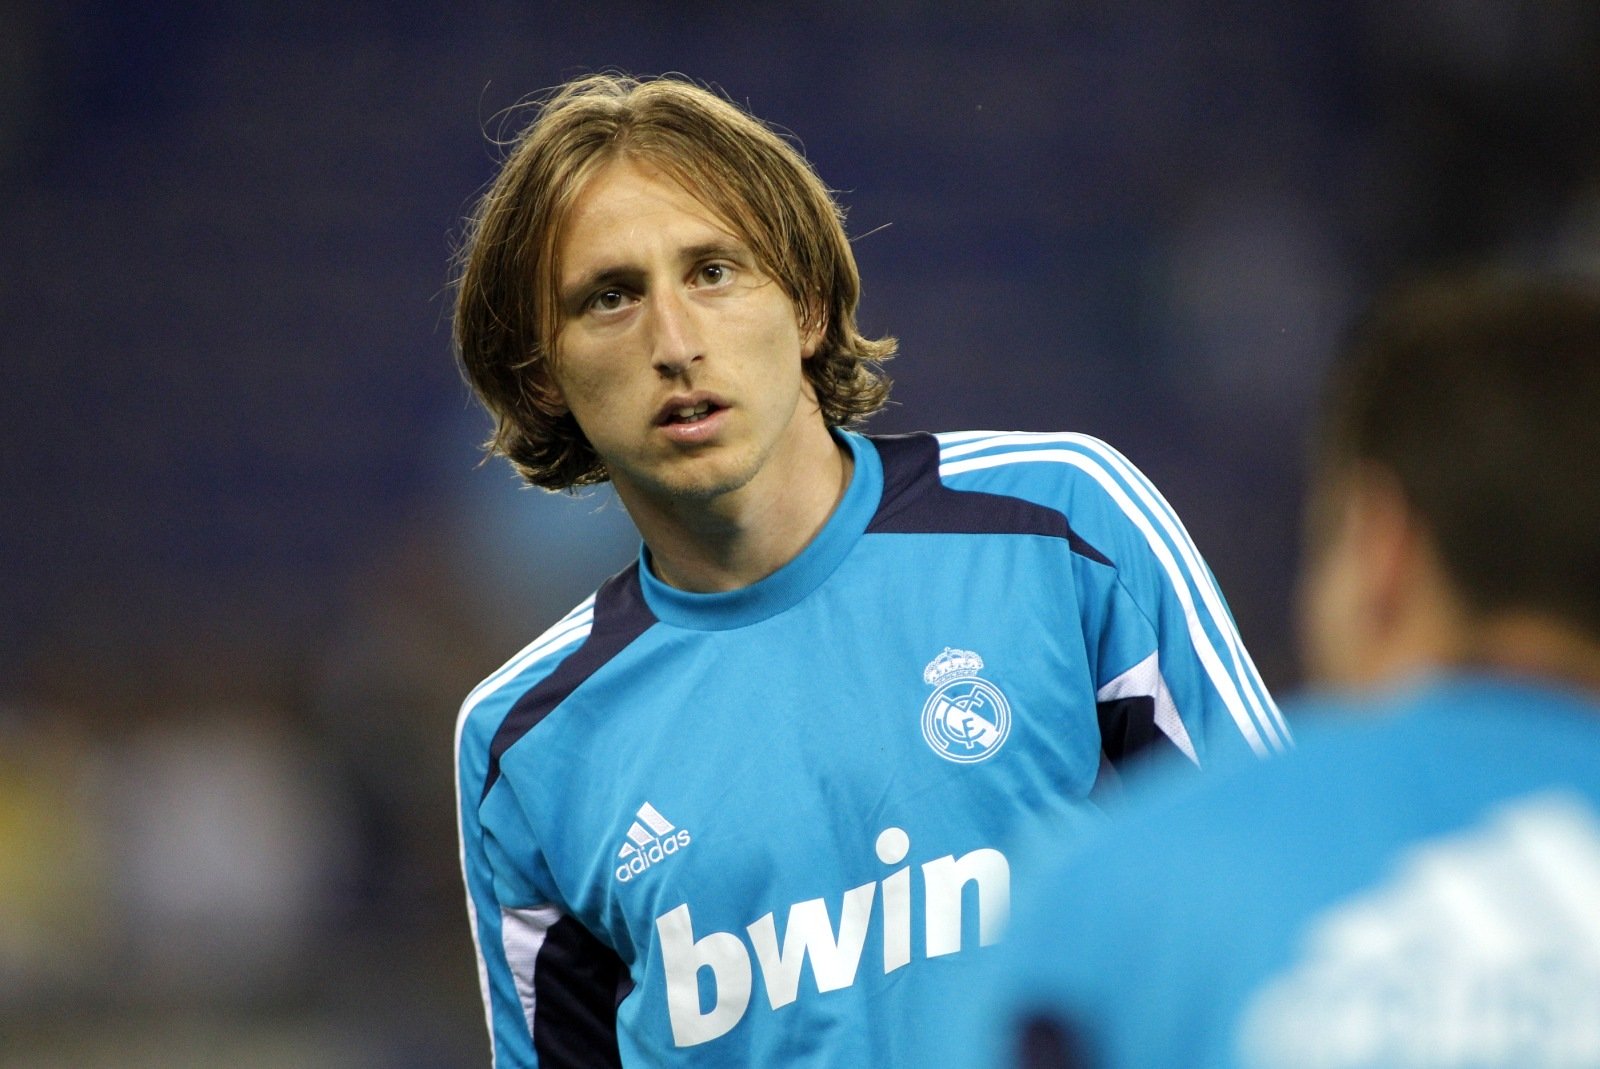 Luka Modric's heavenly first touch for Real Madrid was enough to